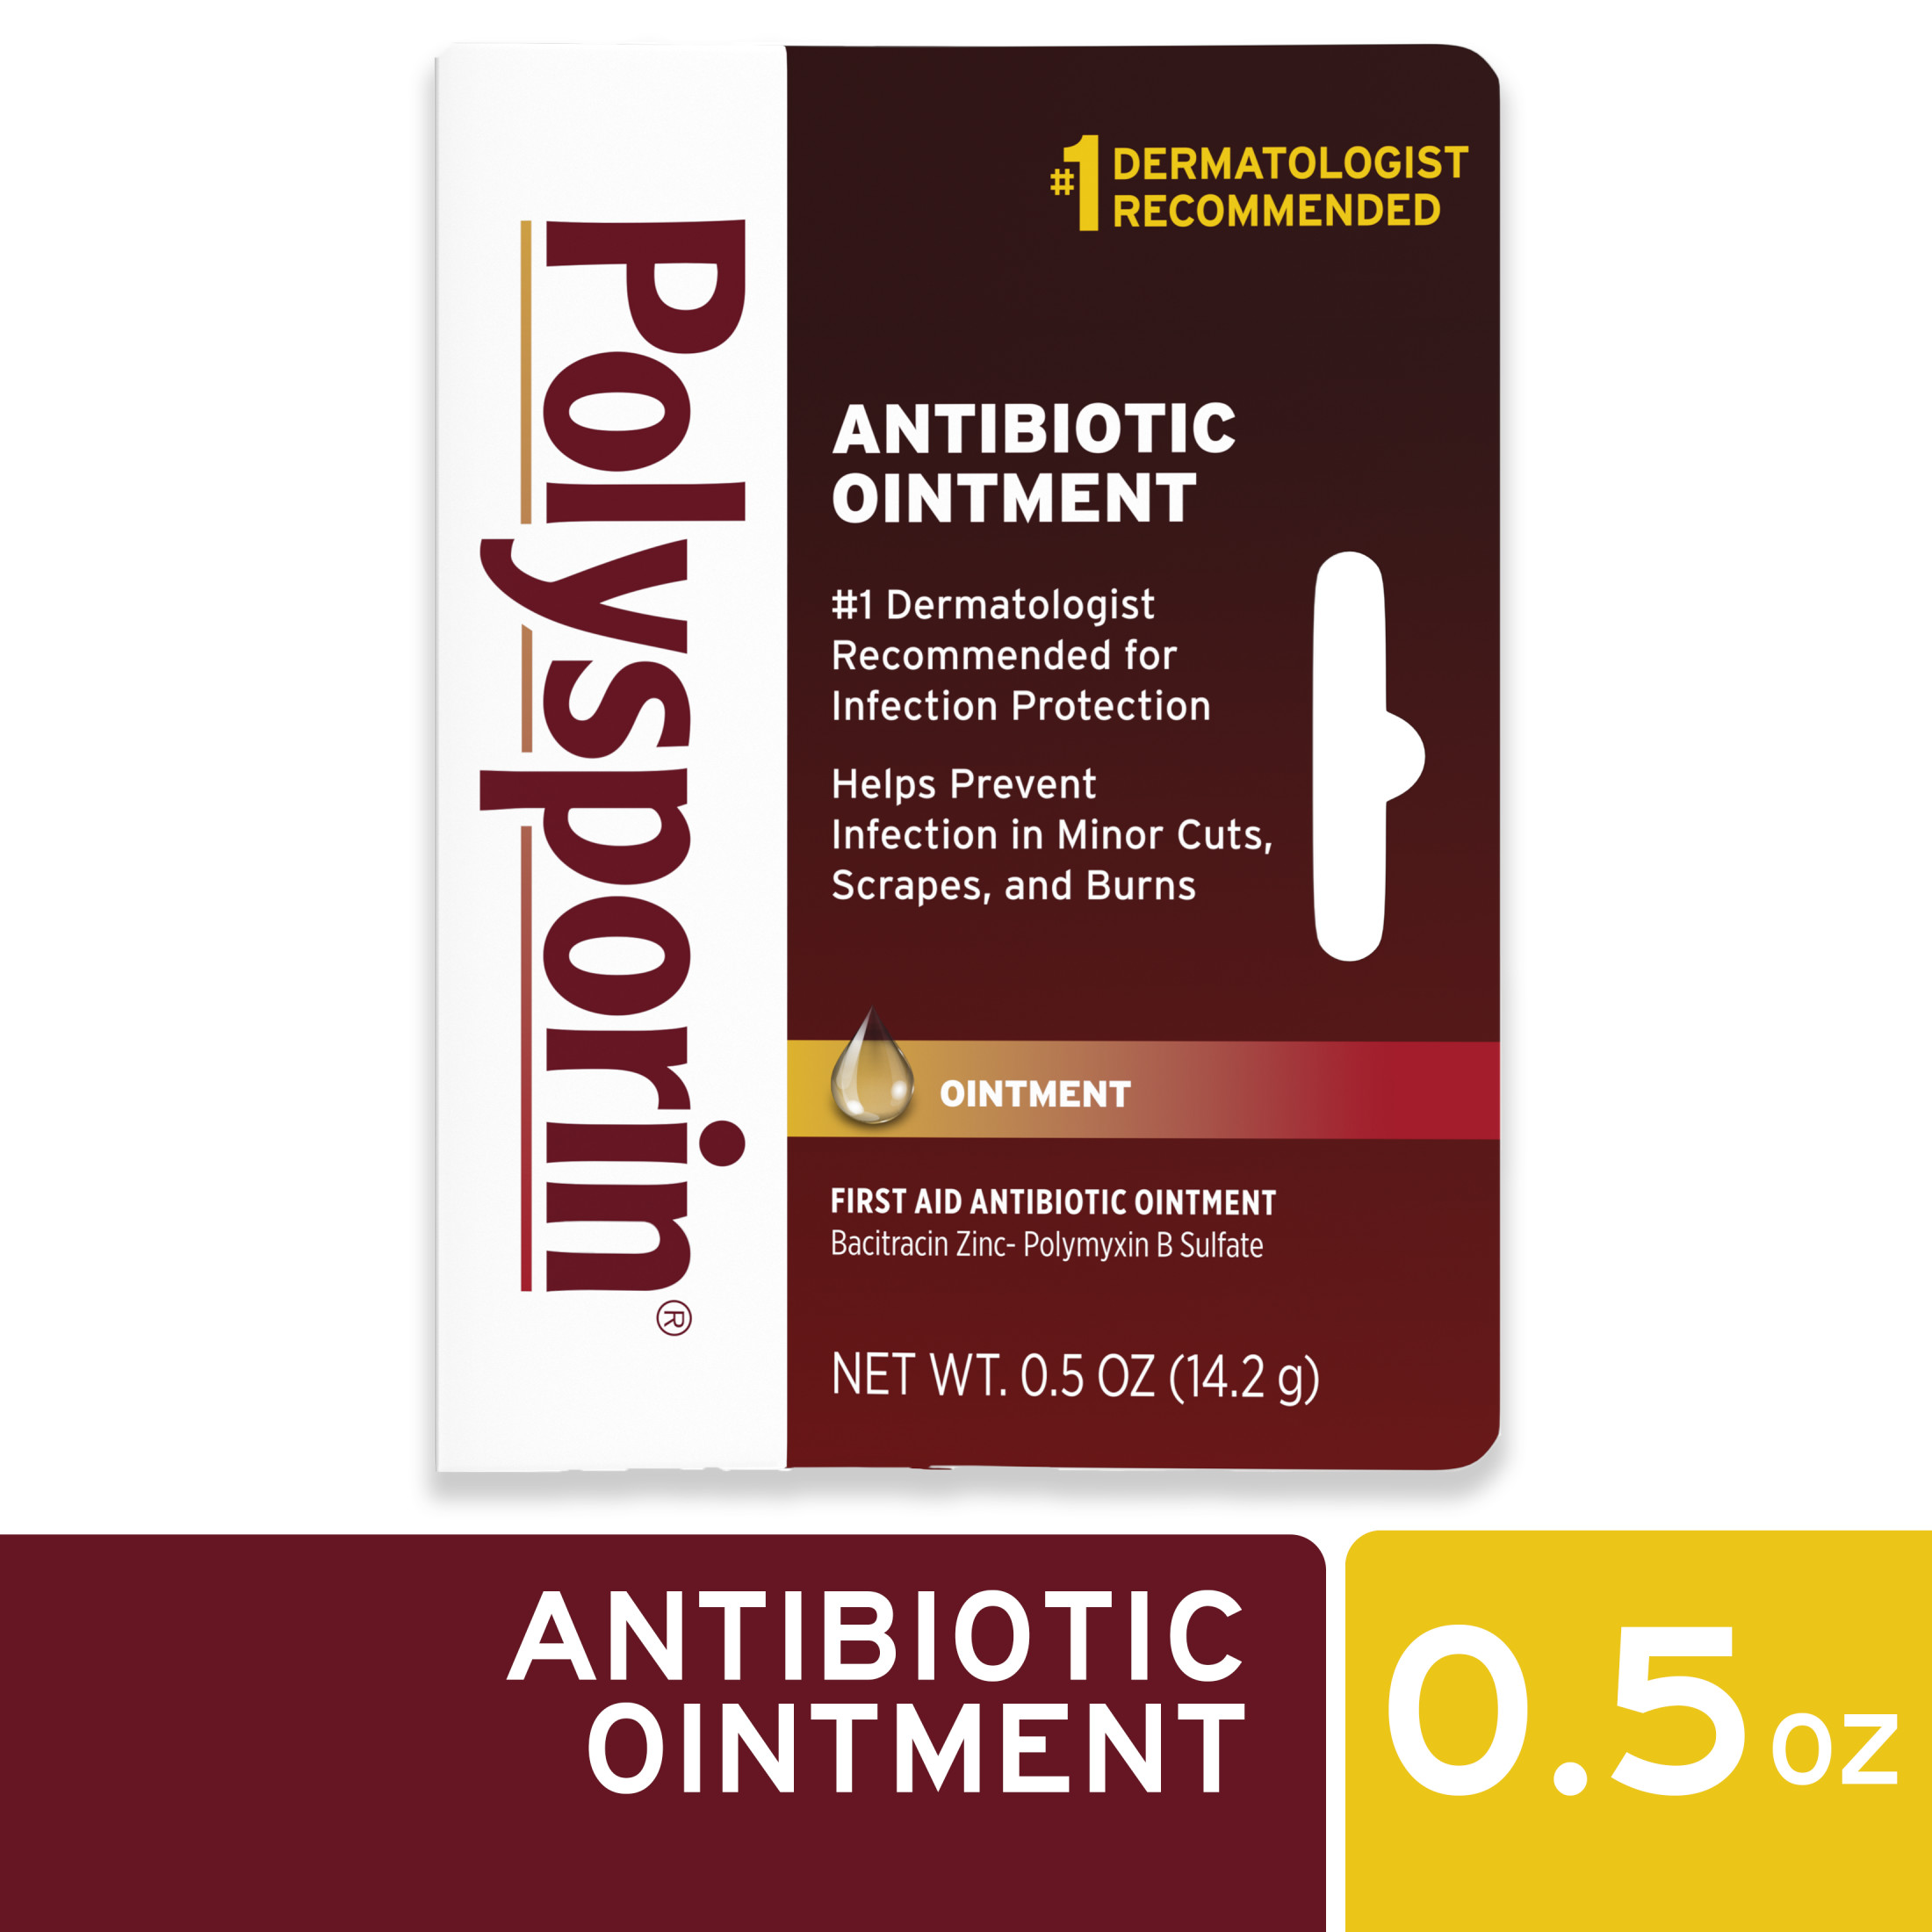 Polysporin First Aid Topical Antibiotic Ointment, Travel Size, 0.5 oz - image 1 of 8